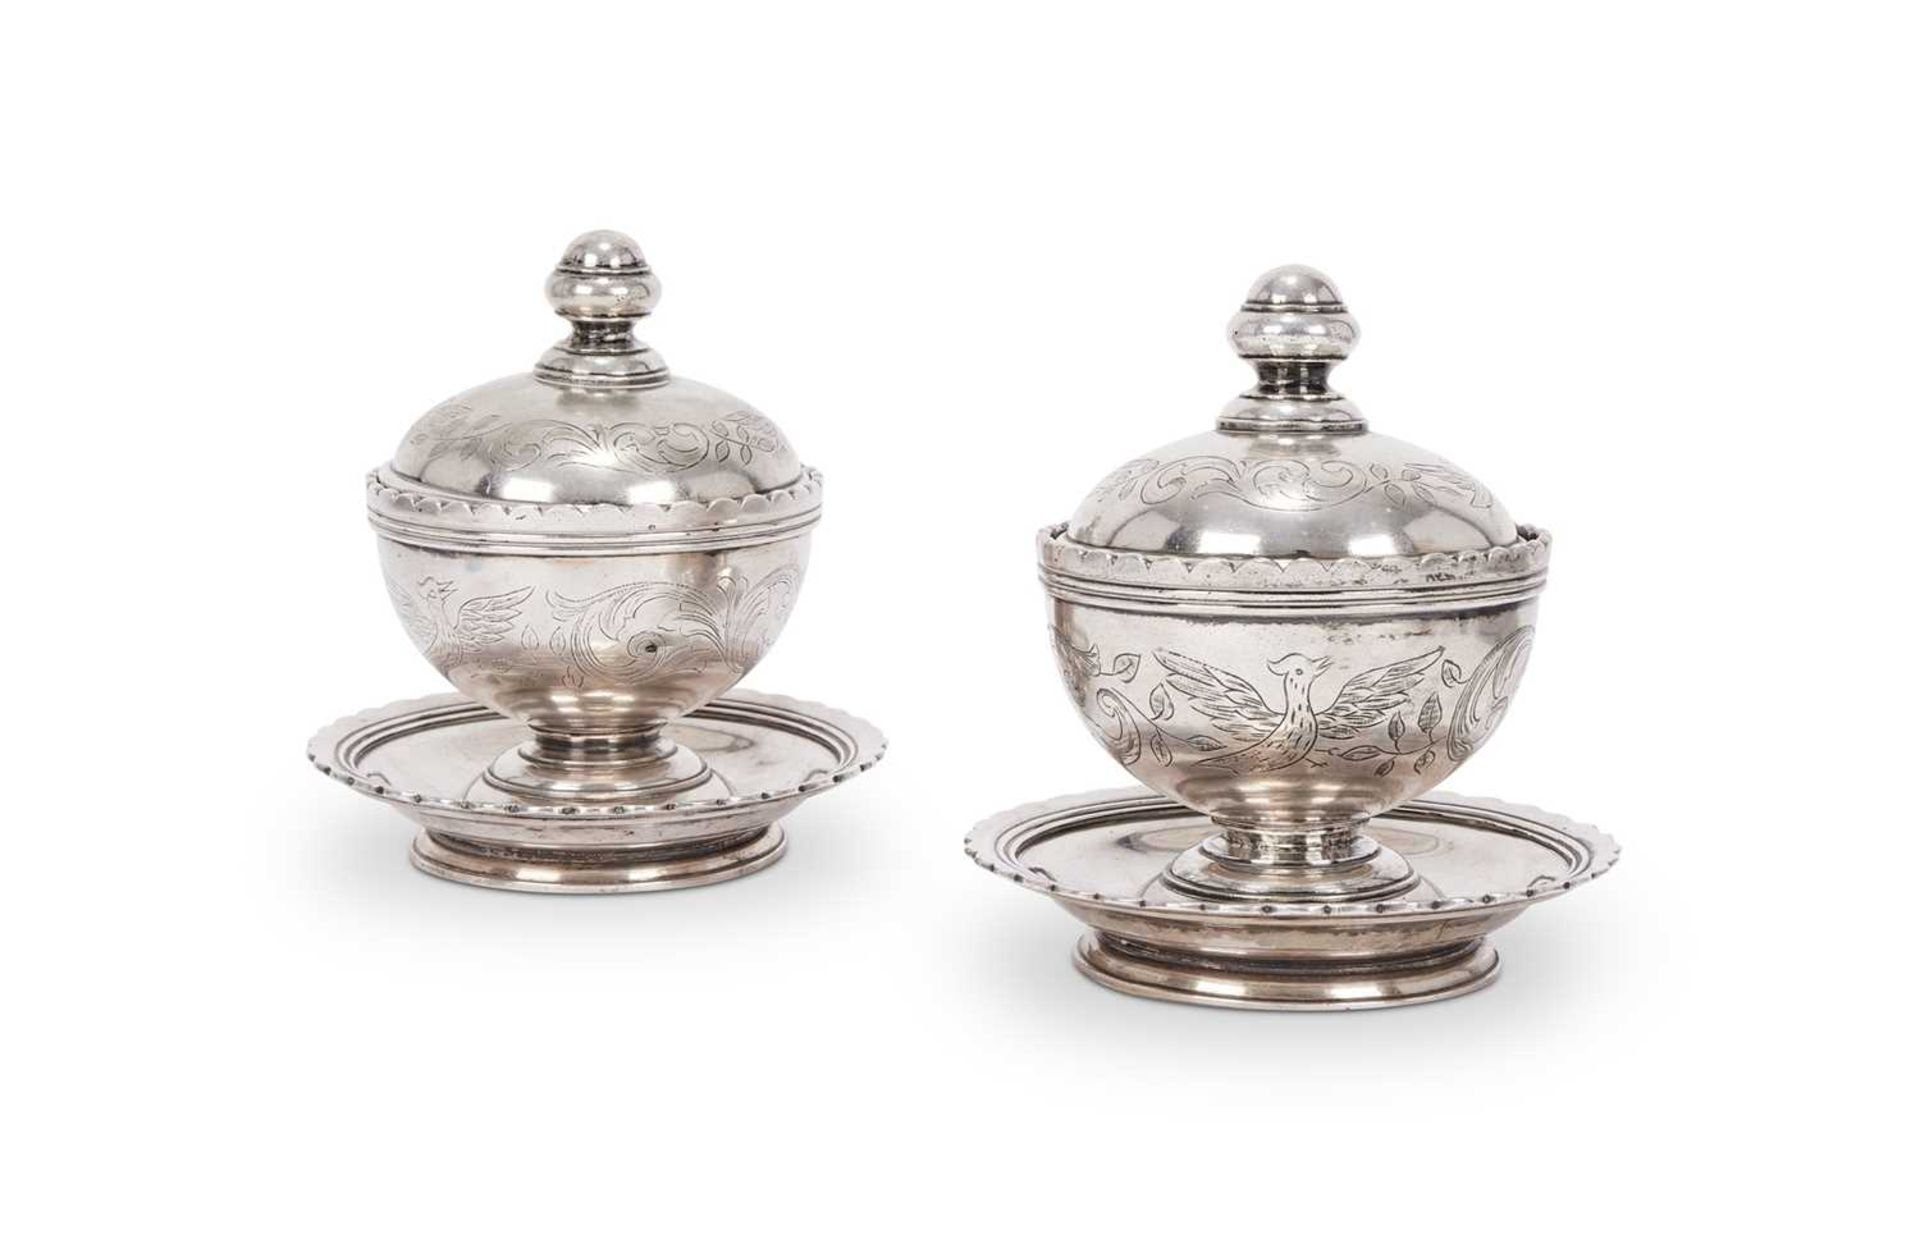 A PAIR OF EGYPTIAN SILVER CAVIAR DISHES MADE FOR THE OTTOMAN MARKET